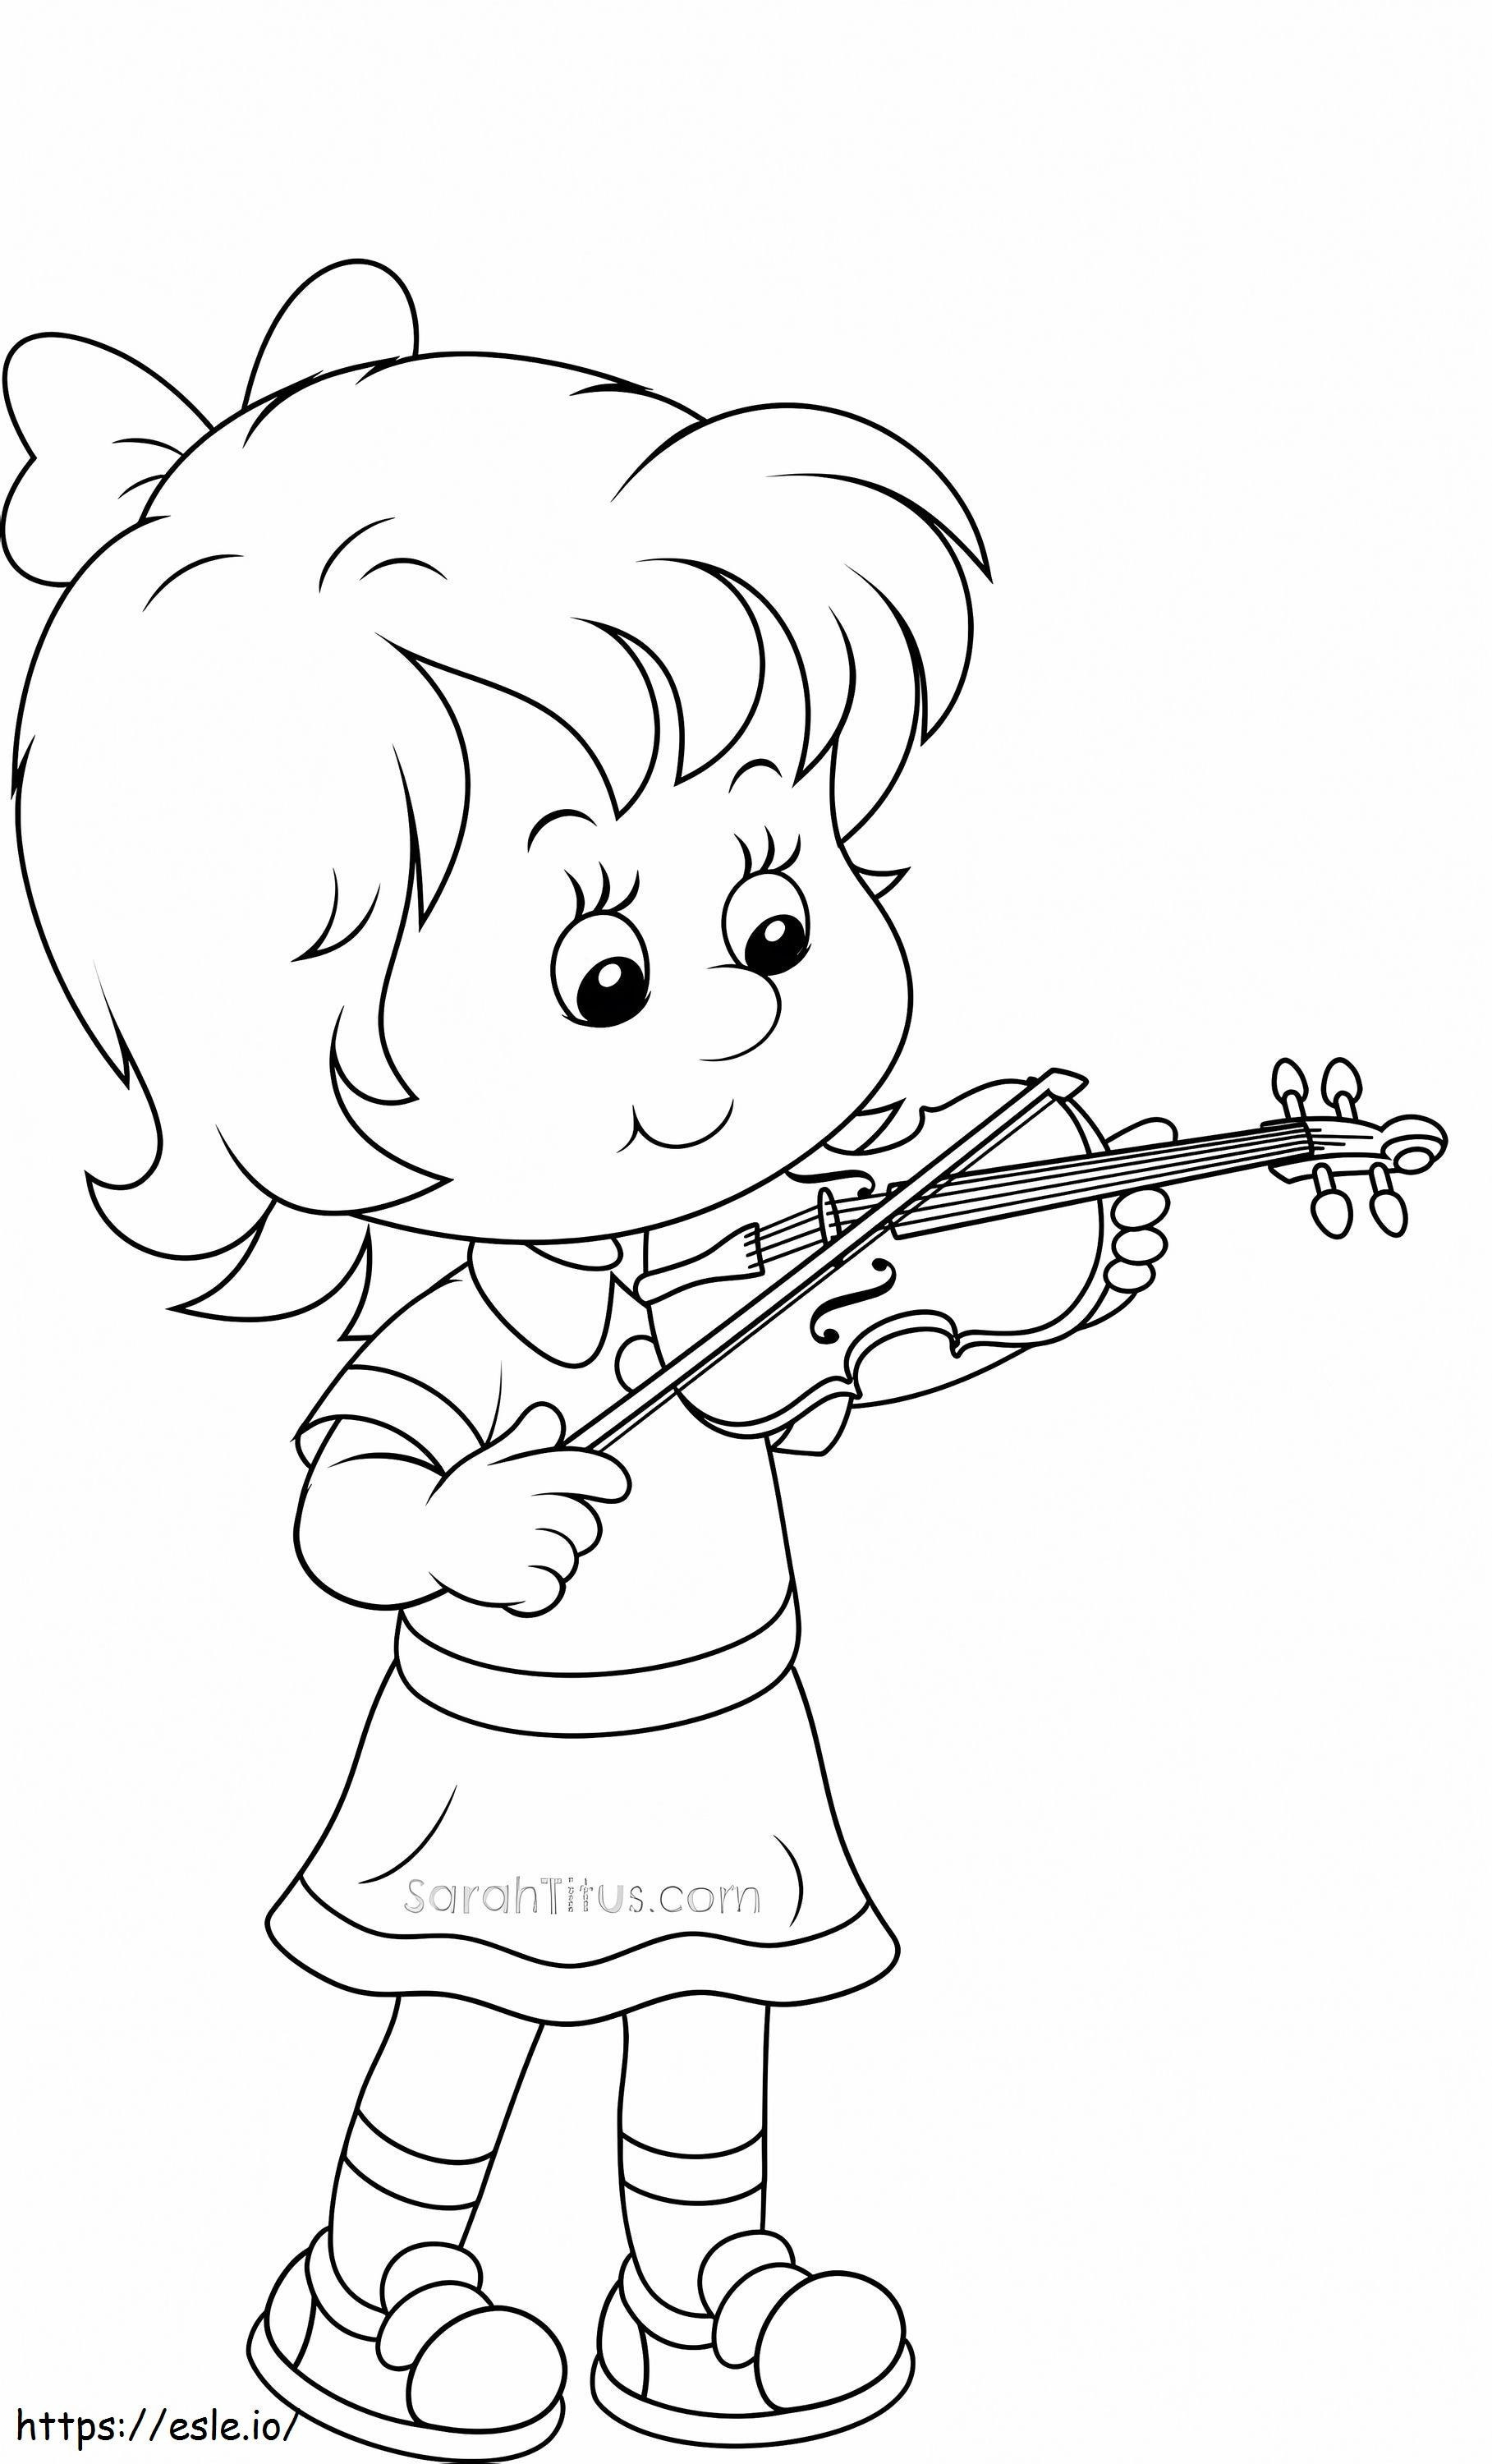 1539402895 Quickly Violin V Is For Page Free Printable 14409 Within coloring page